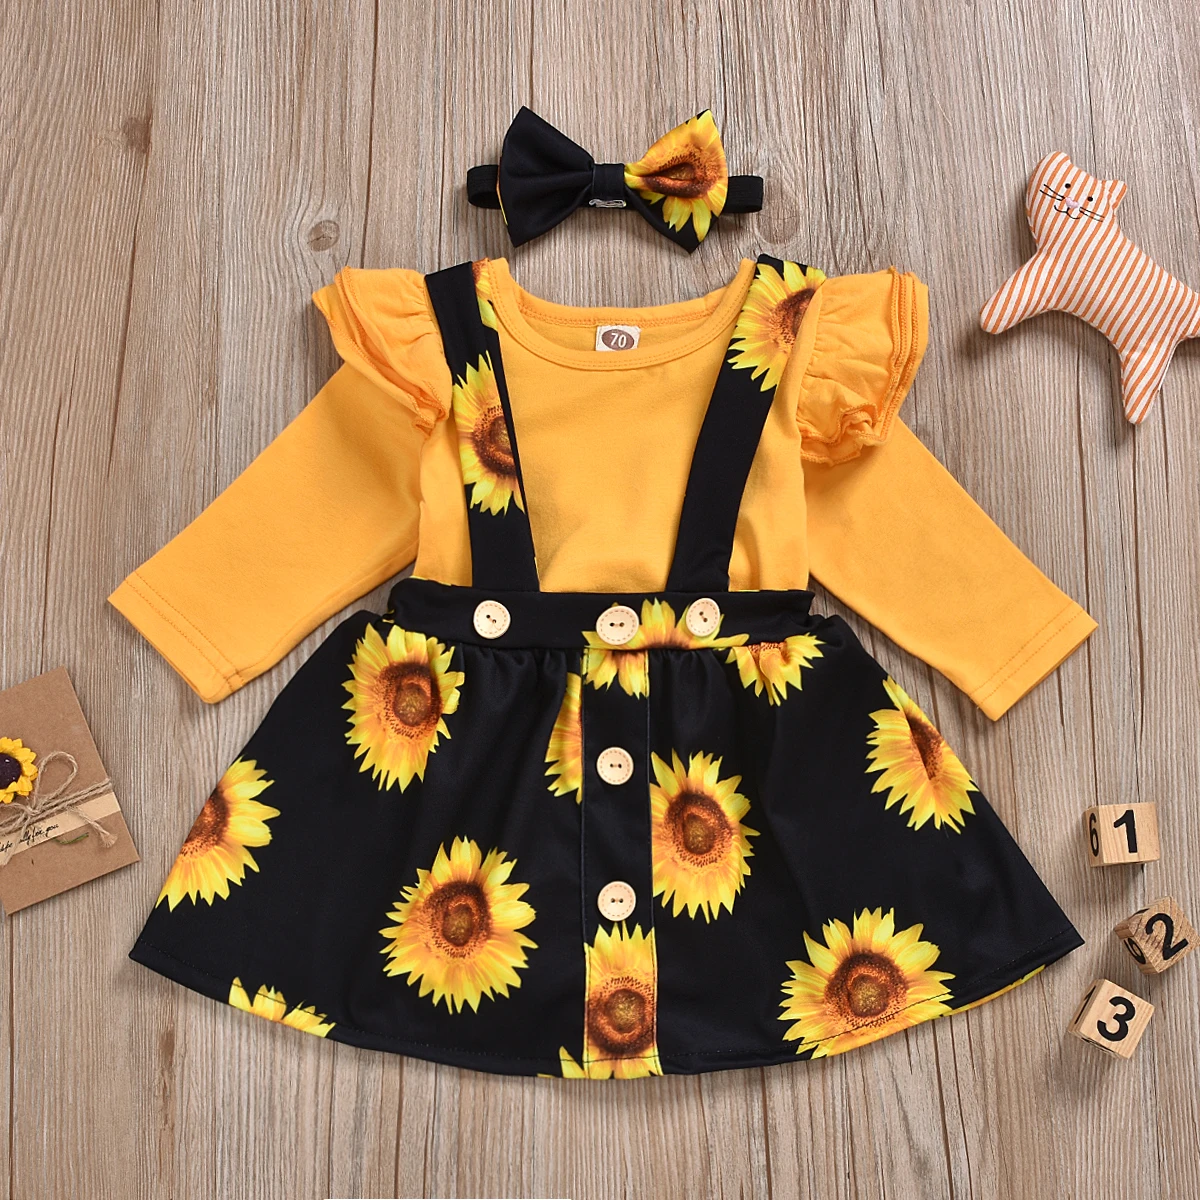 baby clothing set red	 Citgeett Autumn 0-24M 3PCS Newborn Baby Girl Infants Clothes Cotton Romper Sunflower Skirt Outfits Set baby knitted clothing set